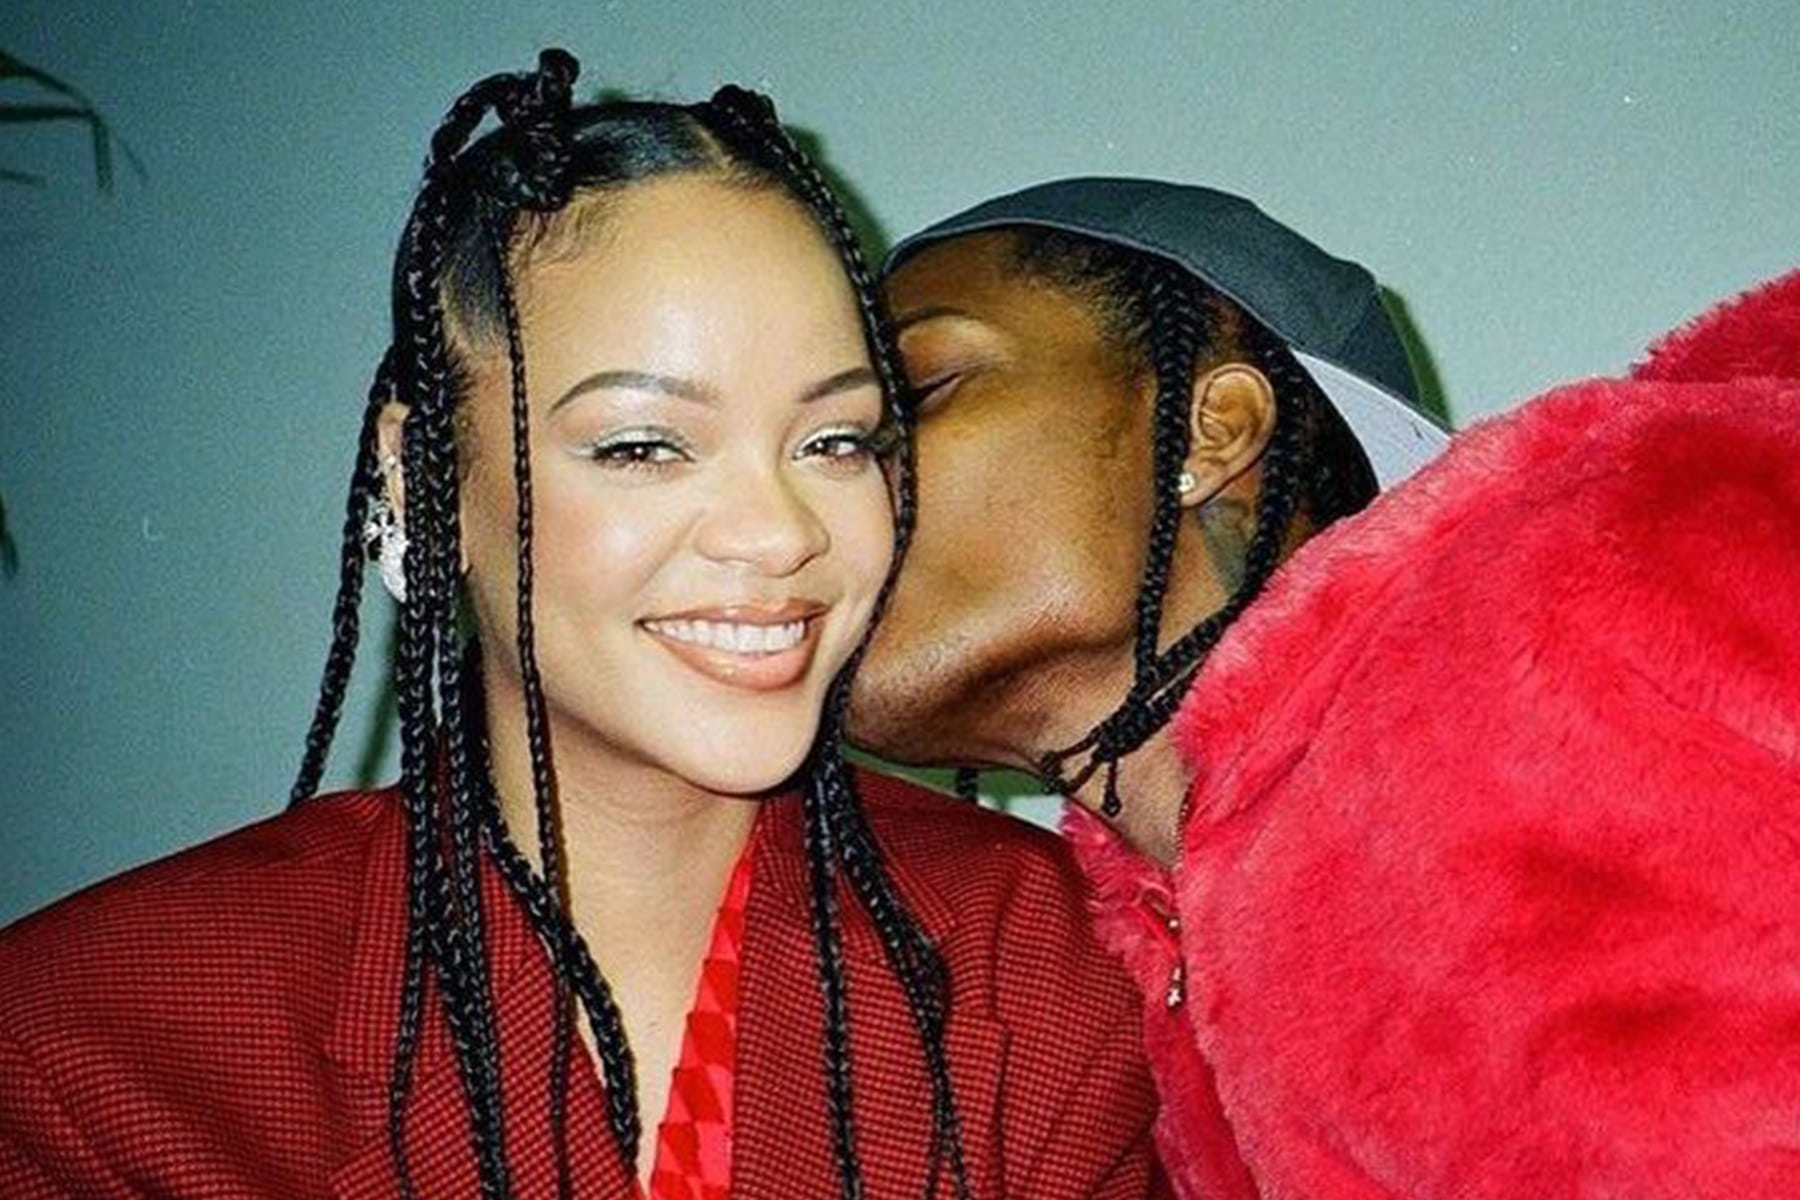 Twitter reacts to Rihanna's pregnancy news in all of the best ways